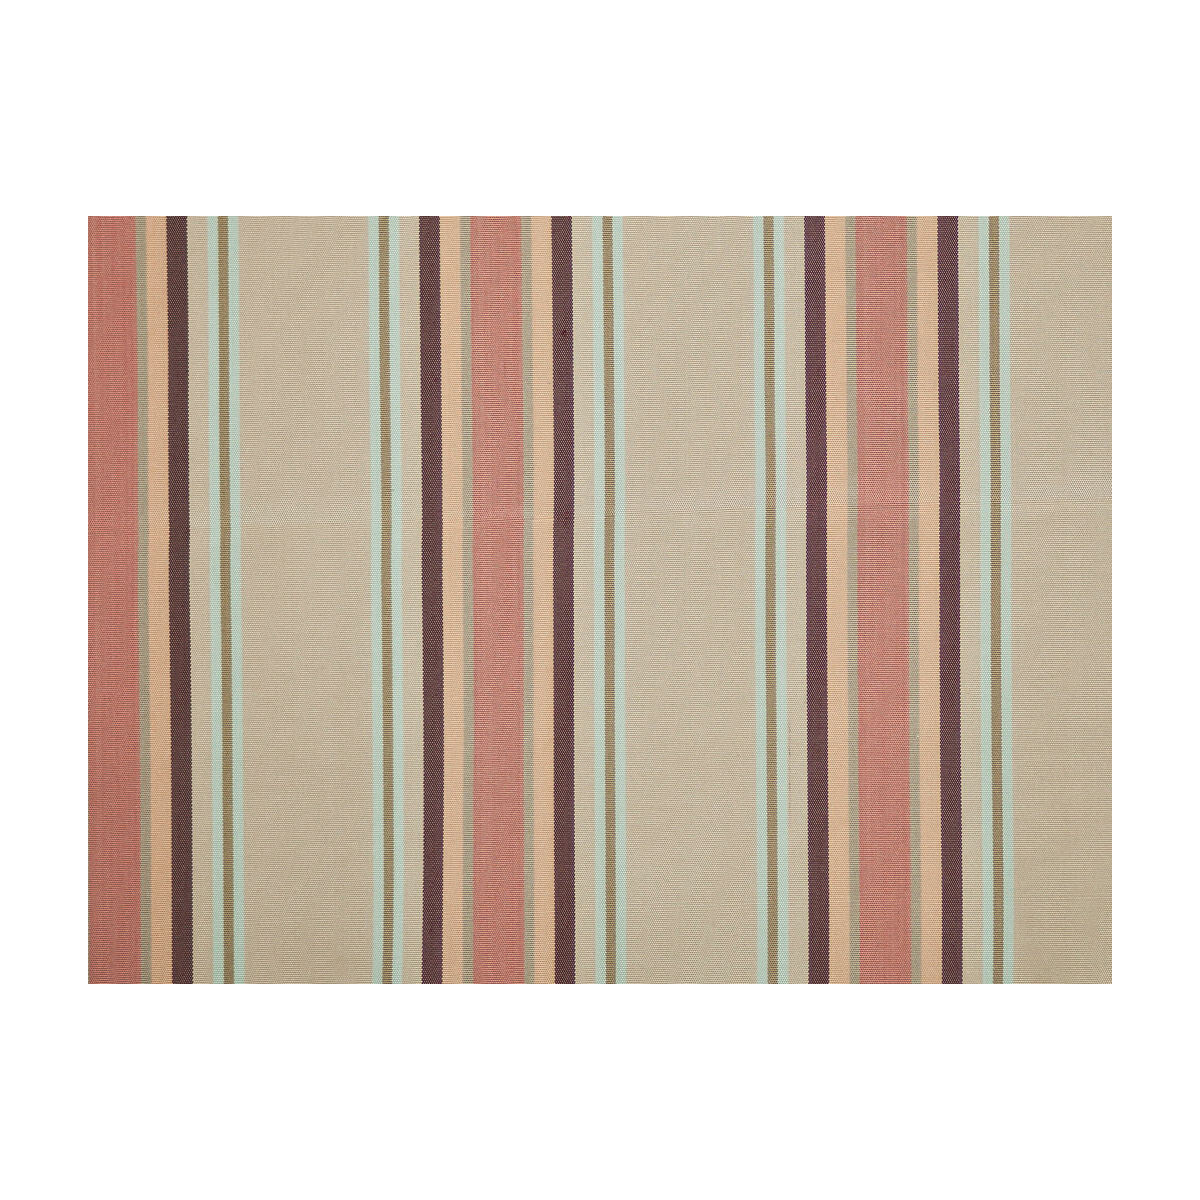 General Stripe fabric in aurora color - pattern JAG-50030.7163.0 - by Brunschwig &amp; Fils in the Jagtar collection